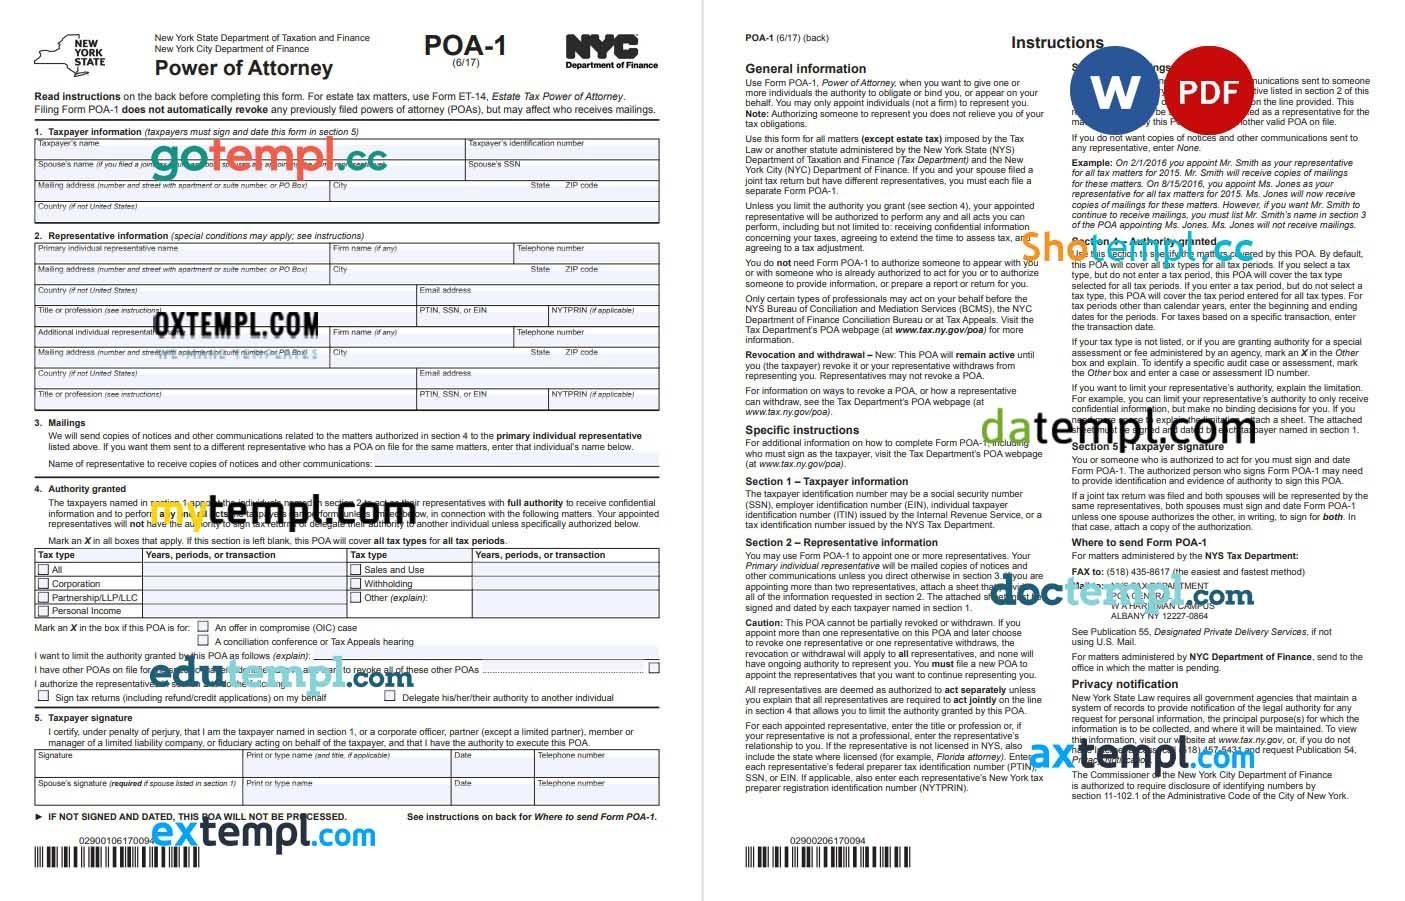 New York Tax Power of Attorney example, fully editable